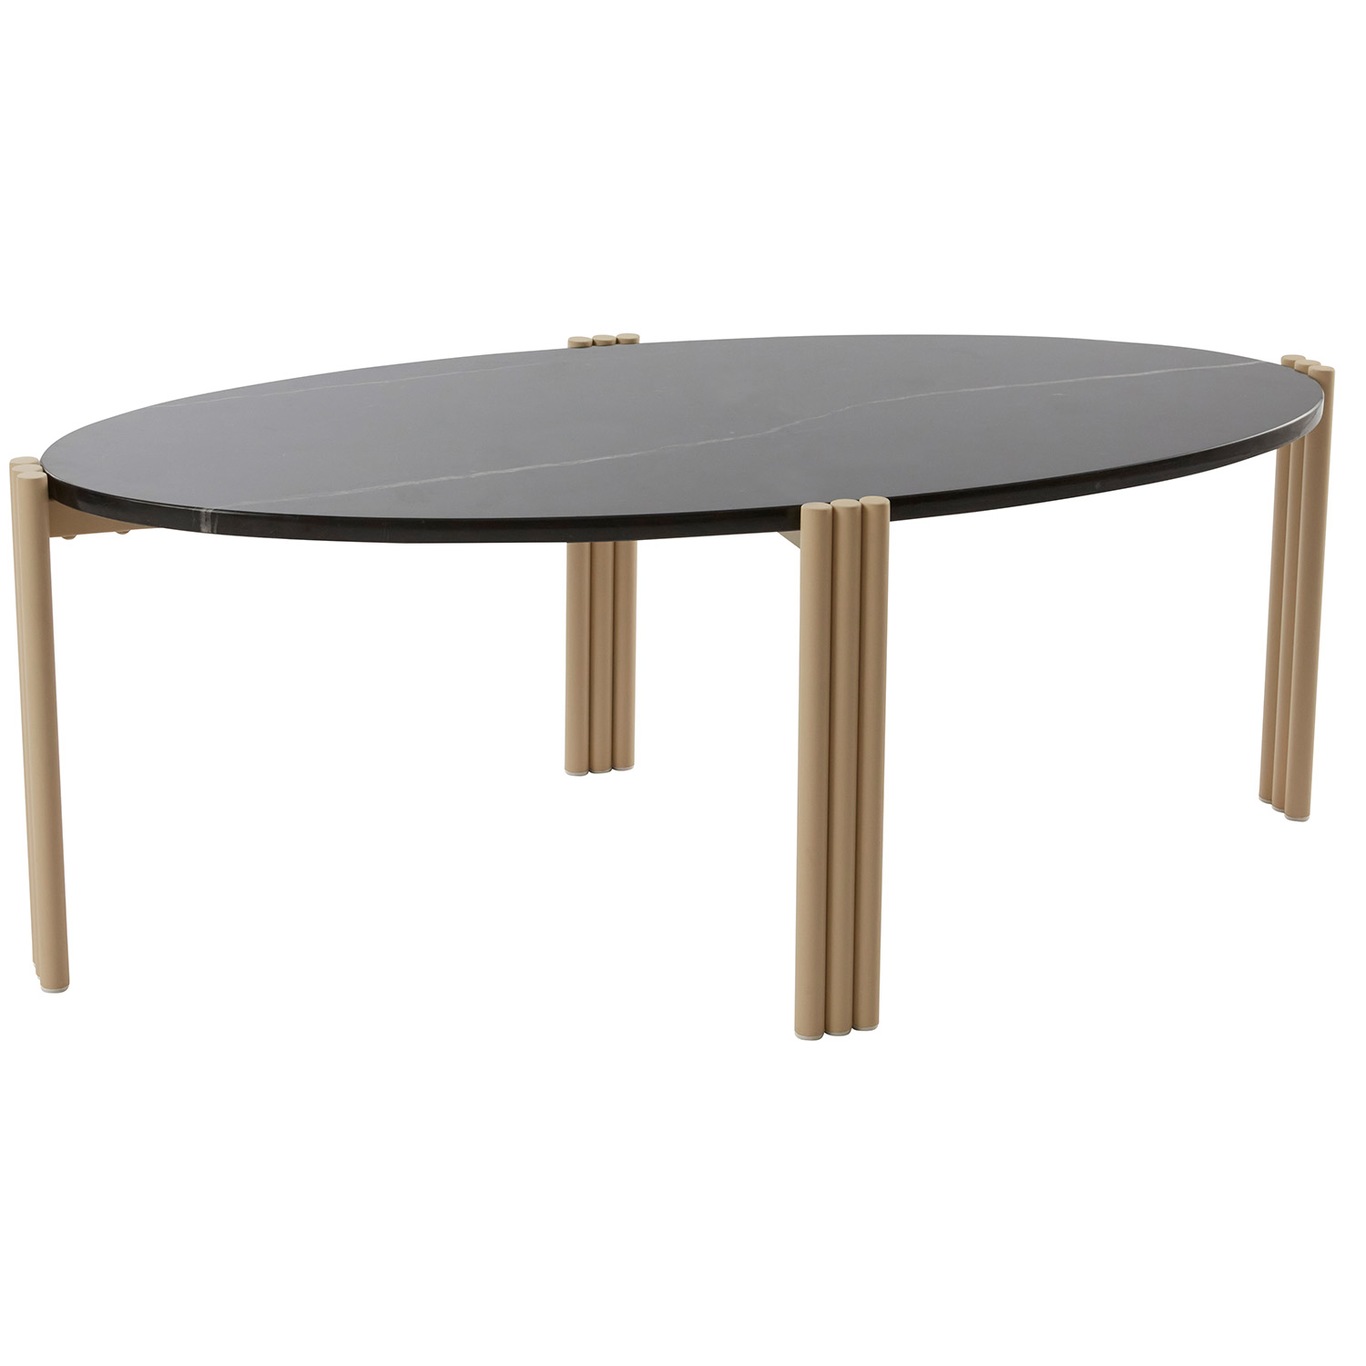 Tribus Coffee Table, Made of steel Oval, Black/Sand